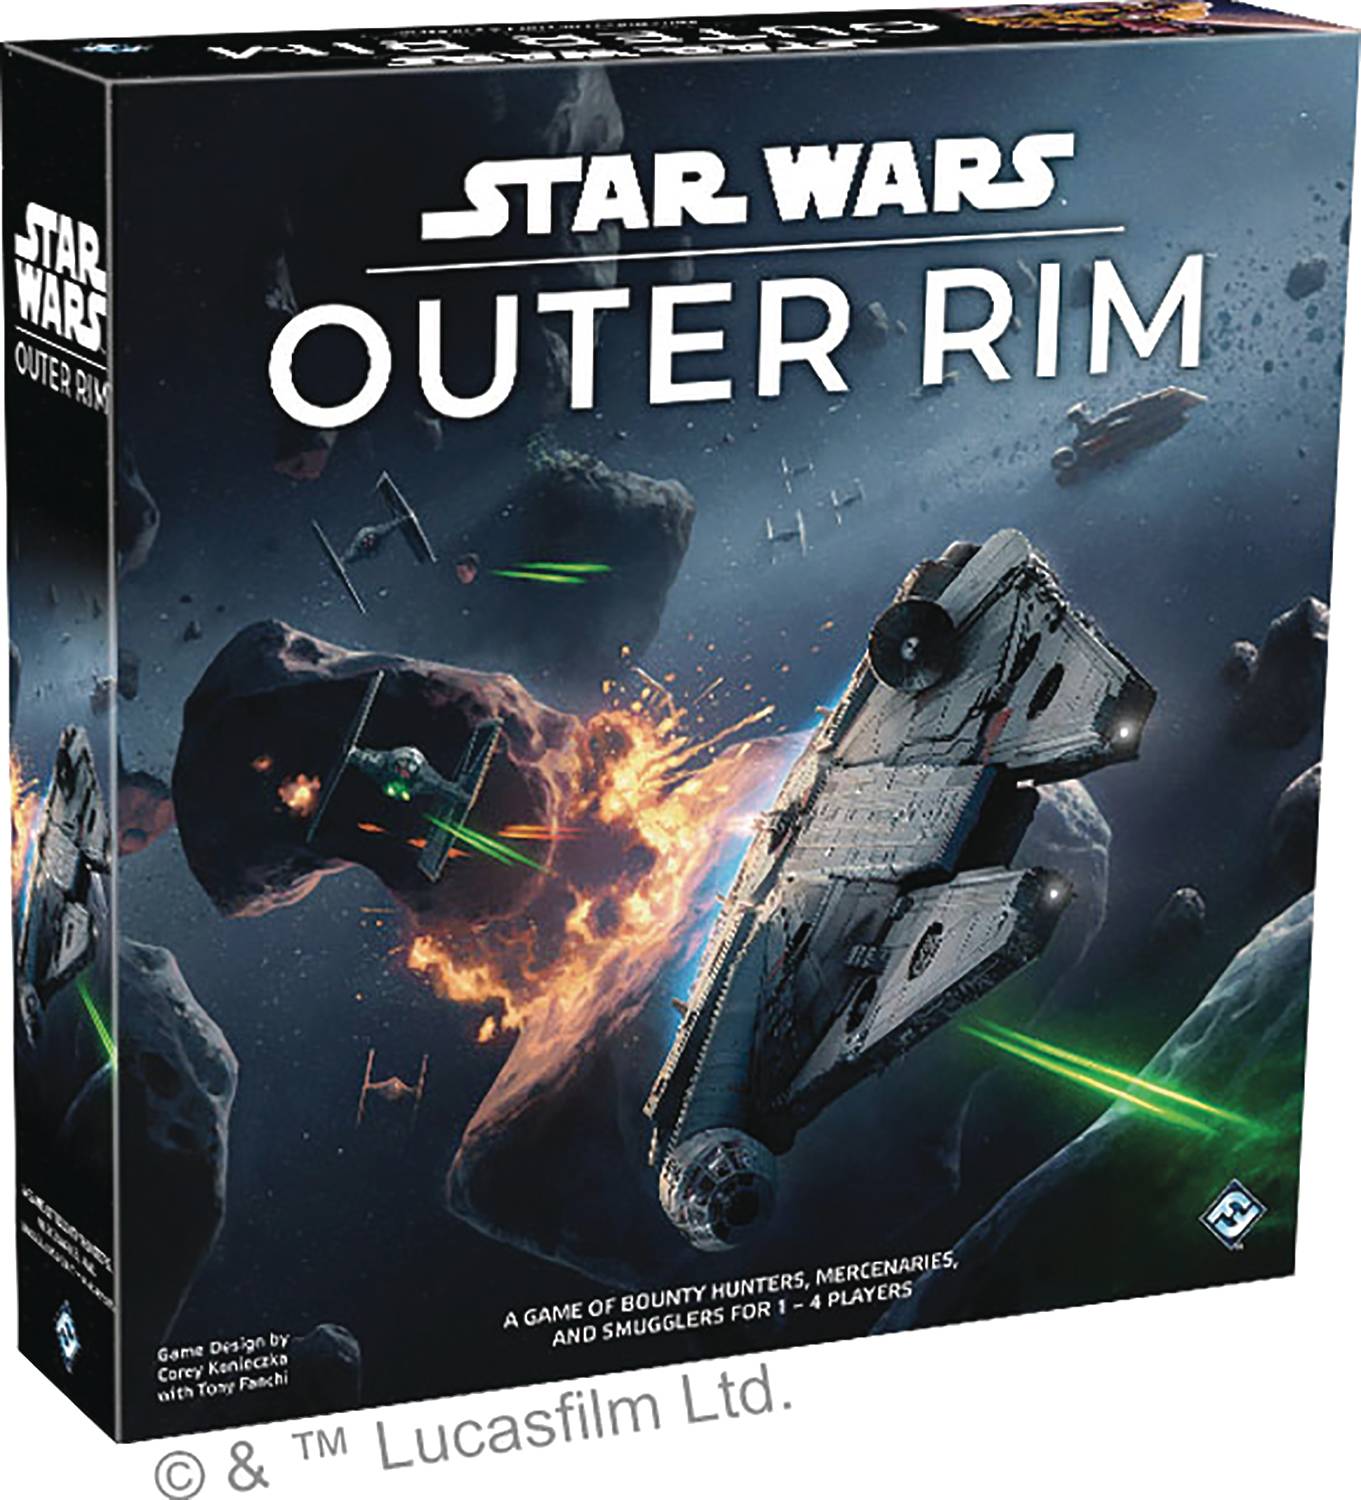 STAR WARS OUTER RIM BOARD GAME (Net) (C: 0-1-2)